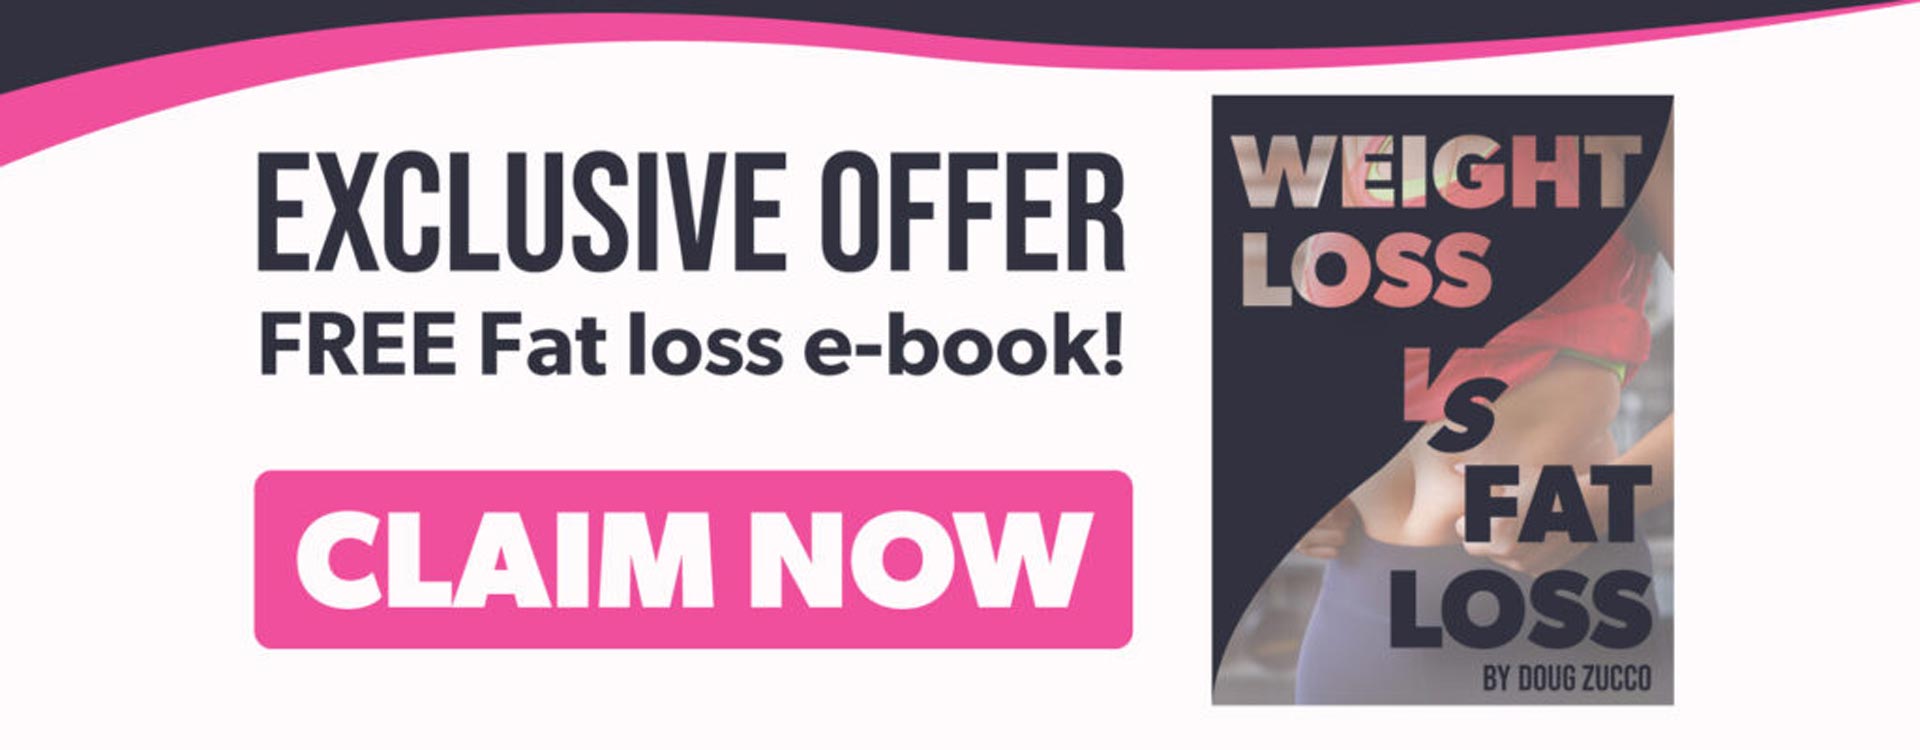 fast fit exclusive offer ebook weight loss